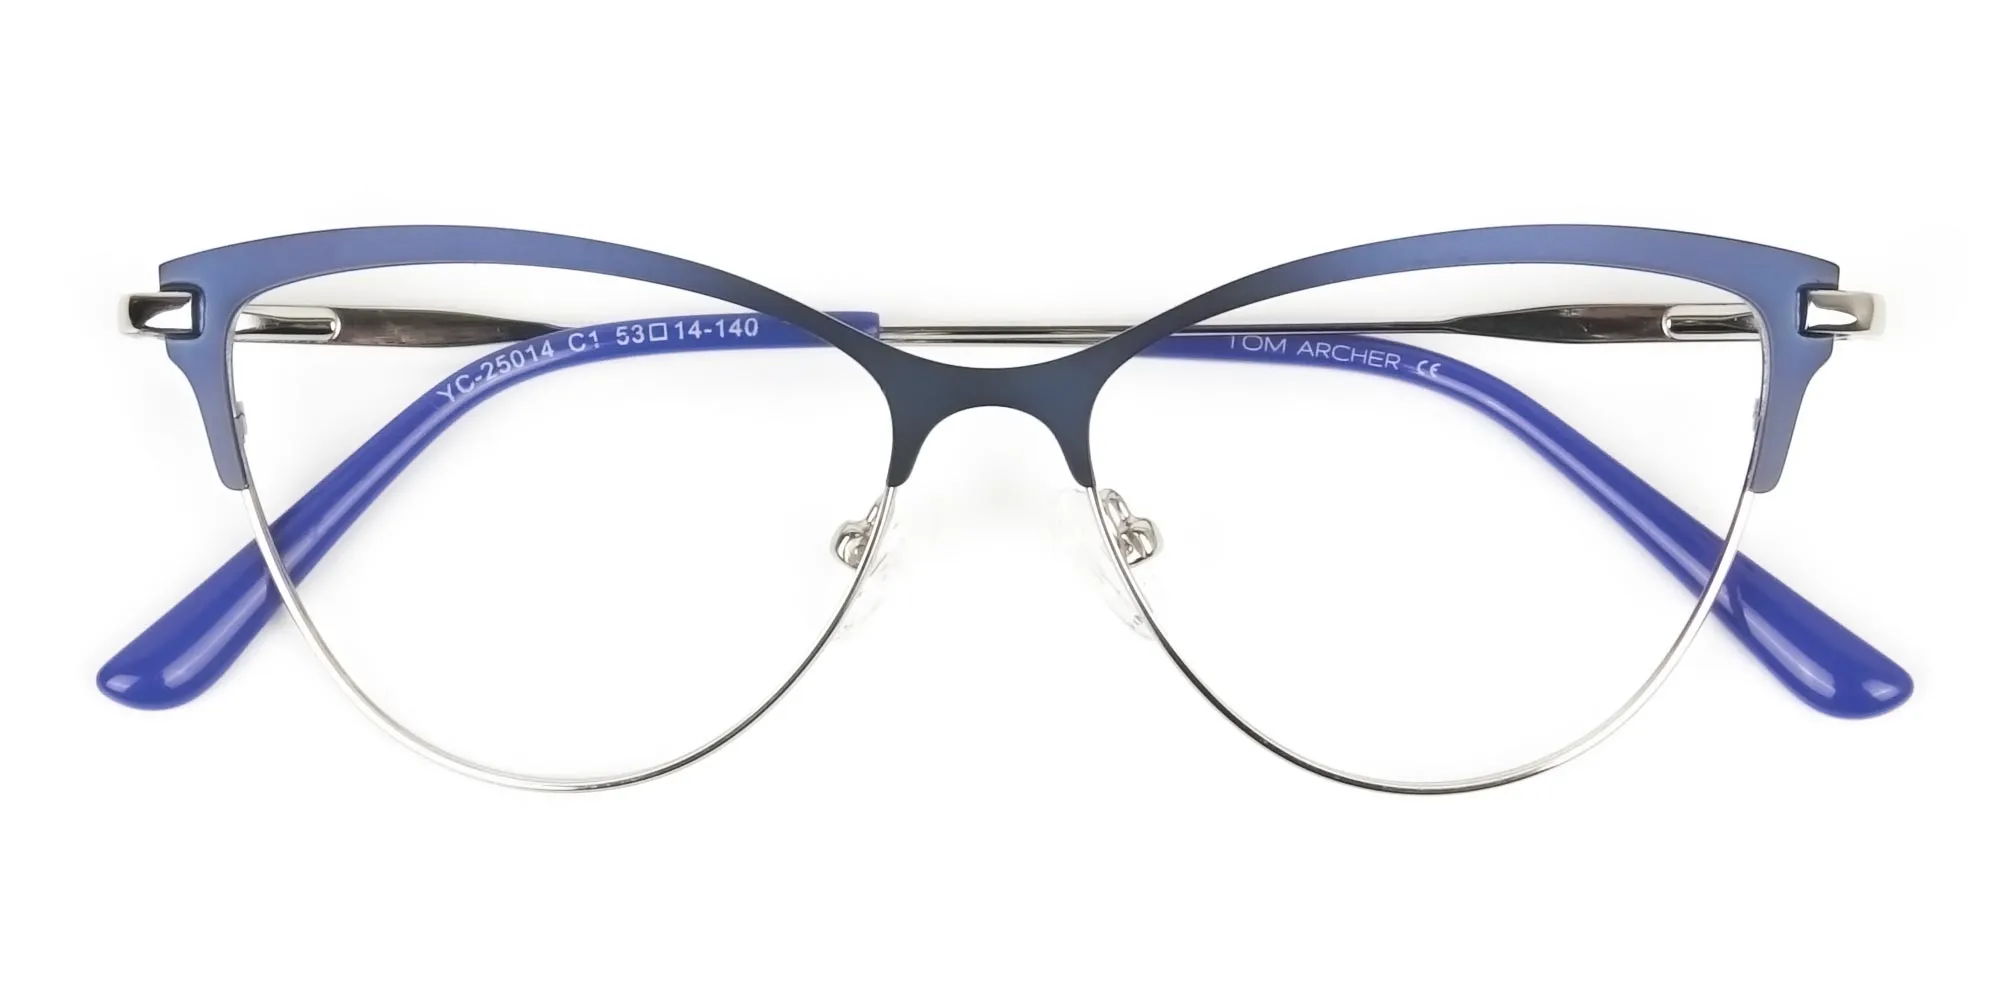 Navy Blue and Silver Metal Cat Eye Glasses - 2